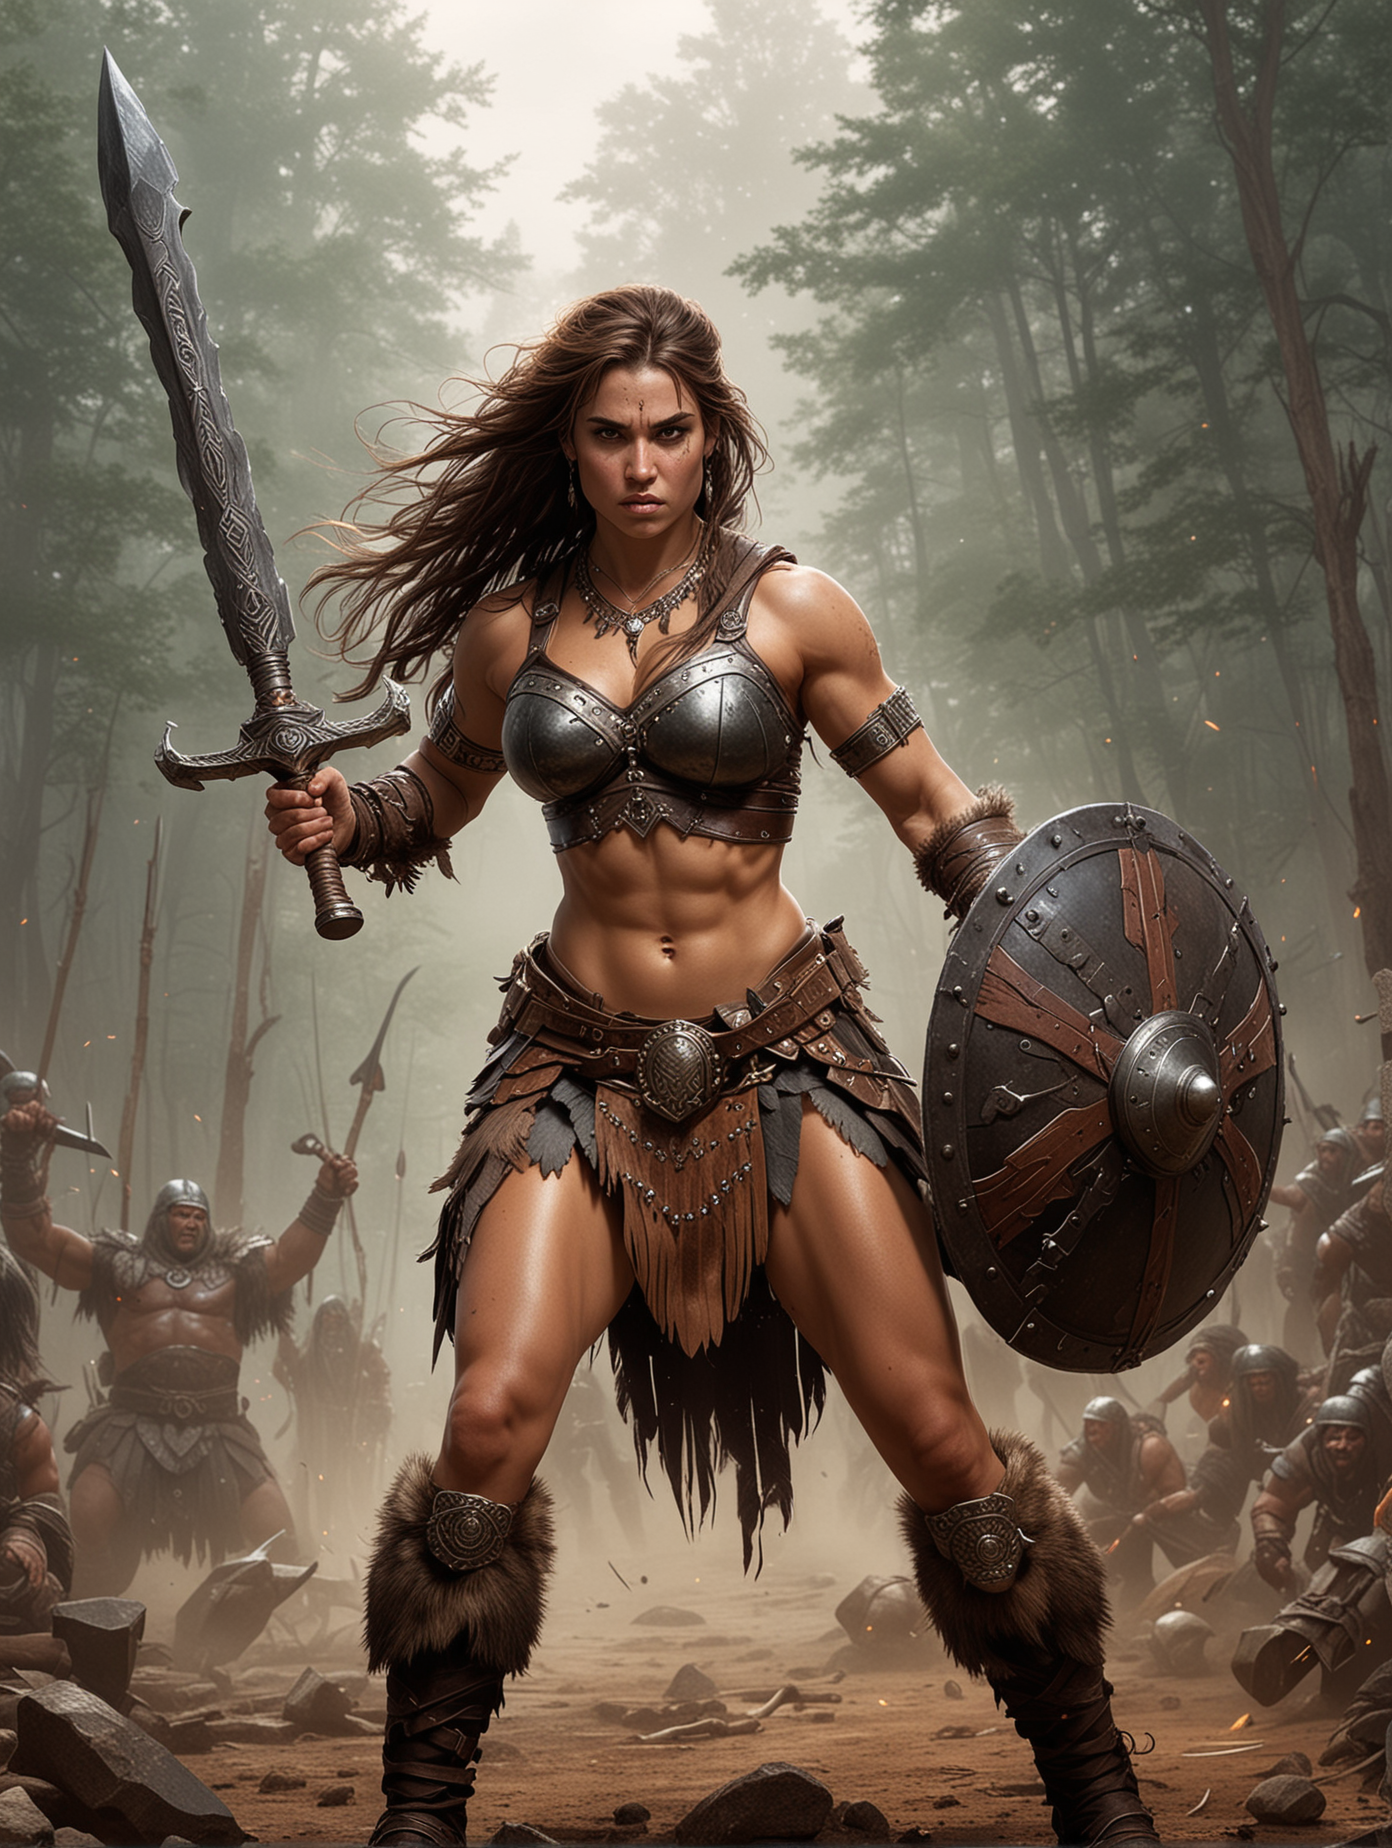 
Barbarian Woman:
Description: A sturdy and intrepid warrior, wearing reinforced leather armor and tribal ornaments. She wields a massive mace with impressive agility, ready to cleave through her opponents with fierce determination.